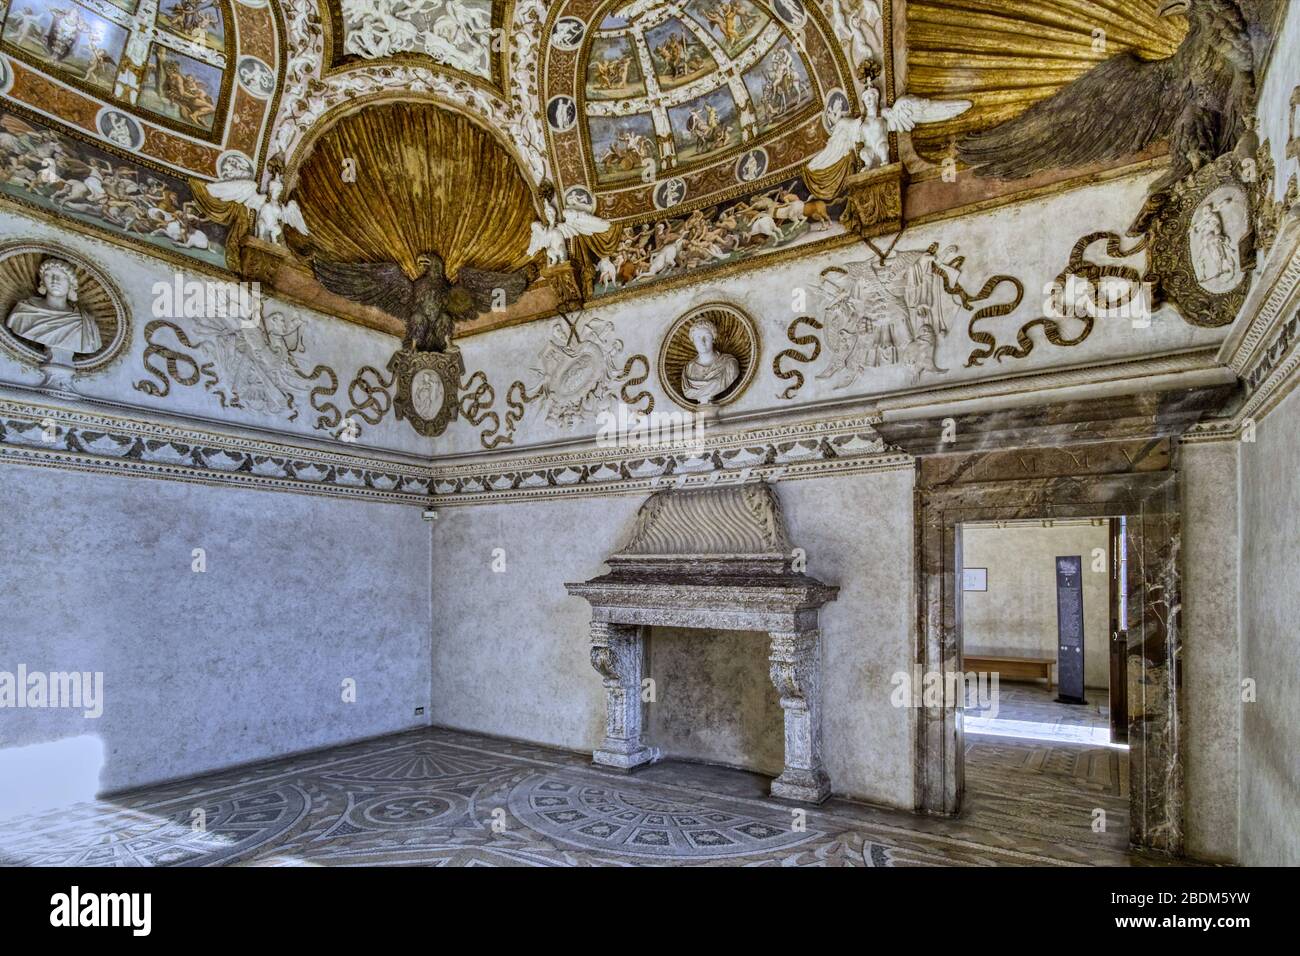 Palazzo Te (16th century), Mantua, Italy. The Camera of the Eagles owes its name to the eagles placed with spread wings at the corners of the room. Stock Photo